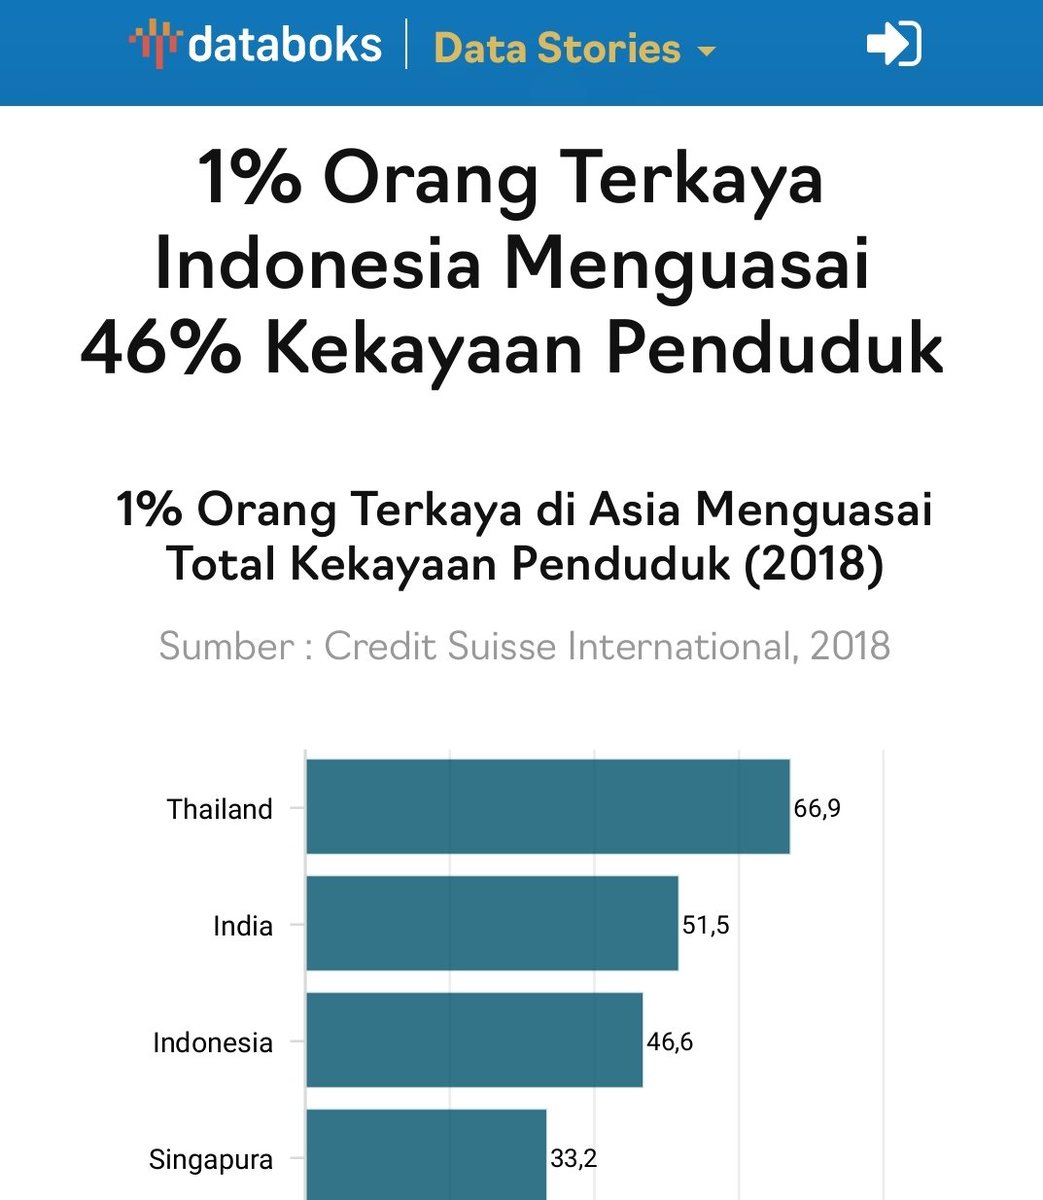 Indonesia: "We are now an upper middle income country."Also Indonesia: